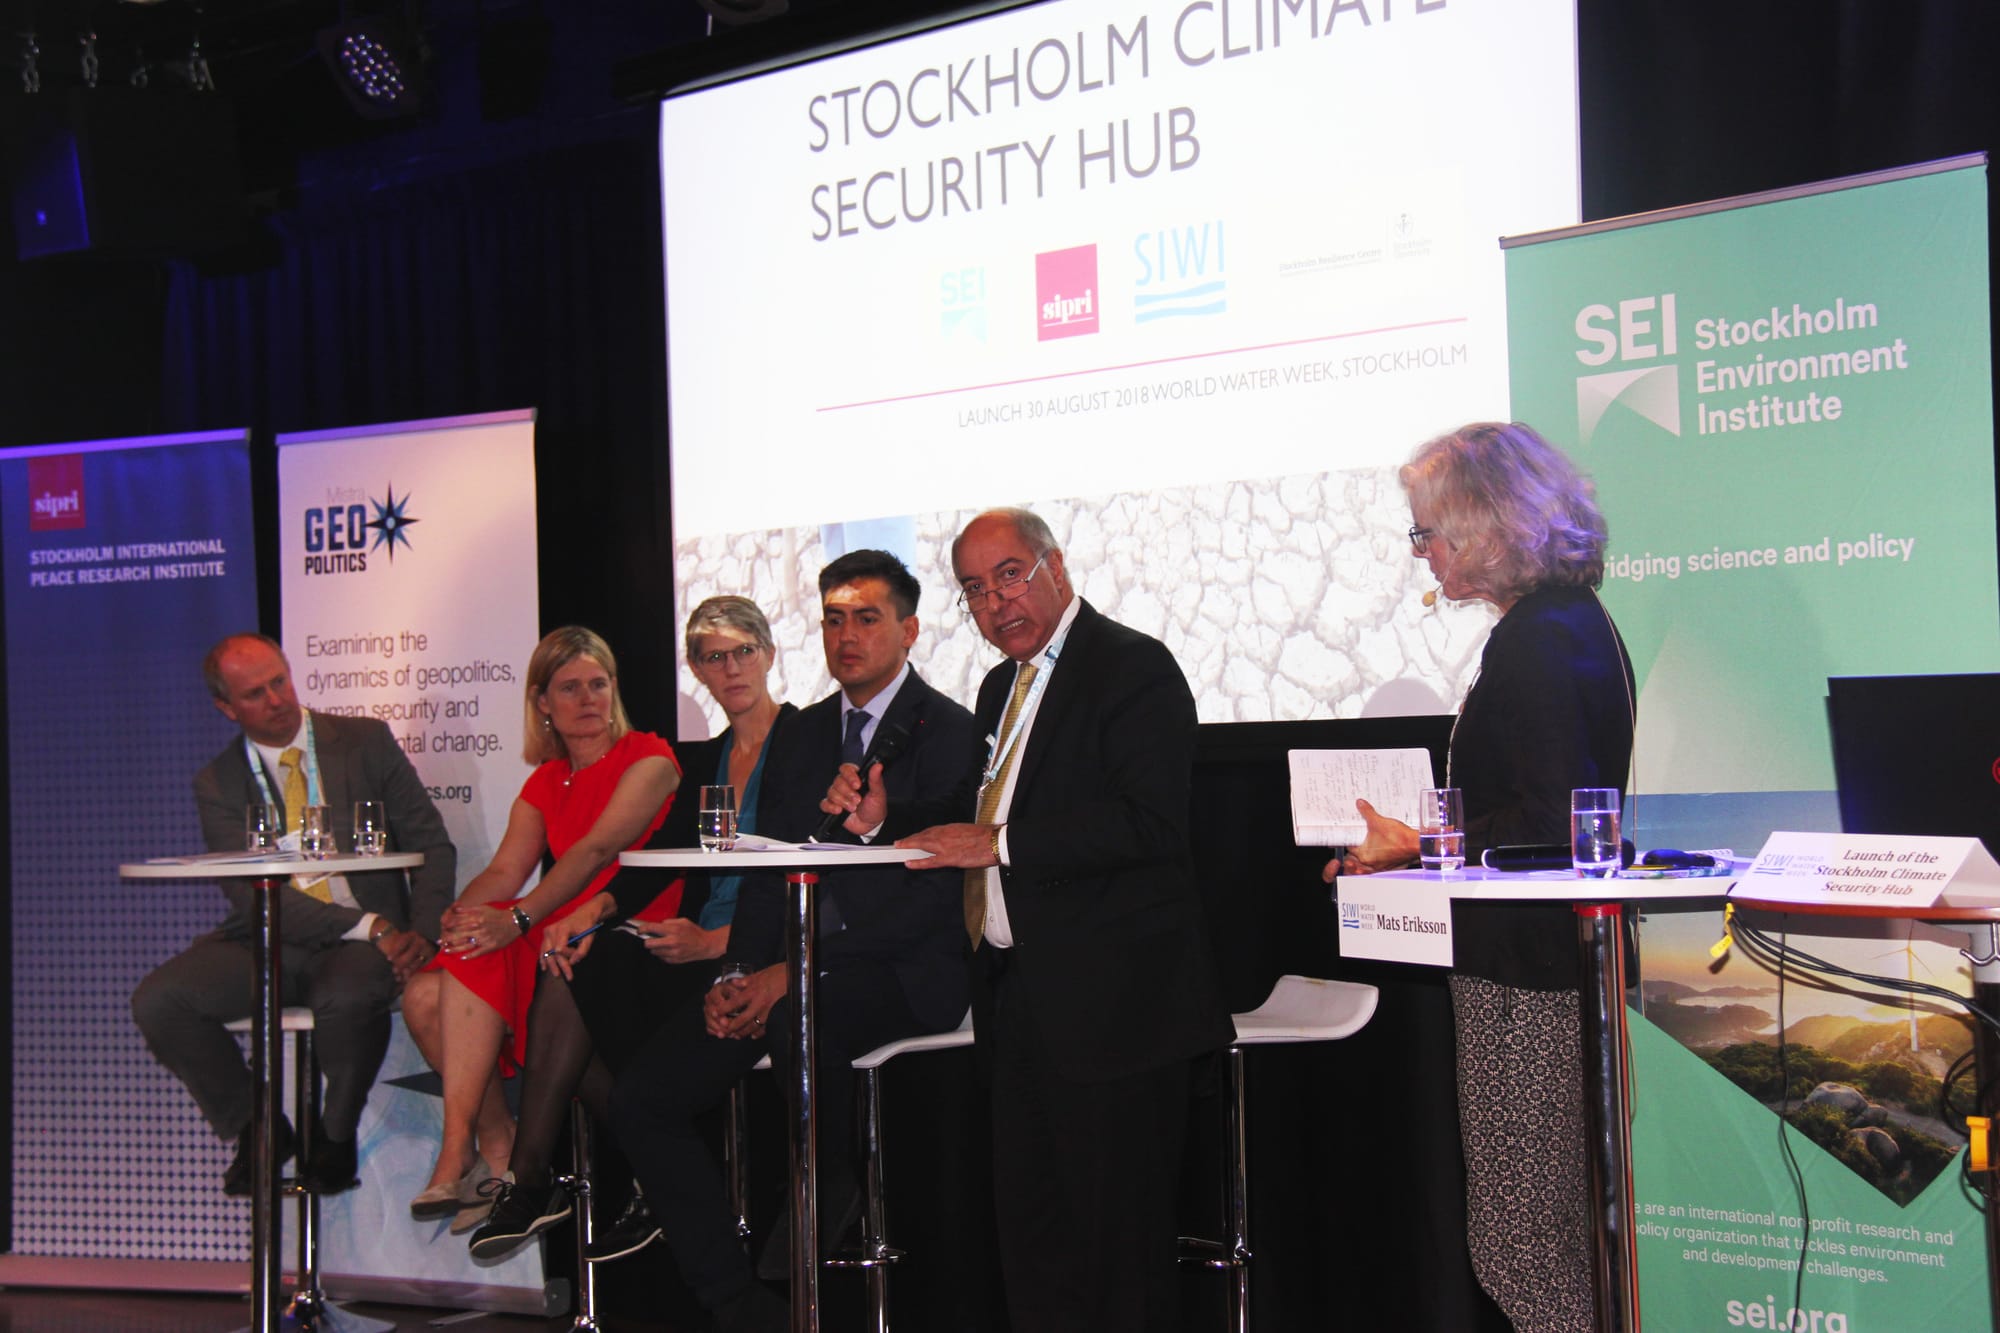 Mistra Geopolitics joins Swedish initiative to highlight climate security